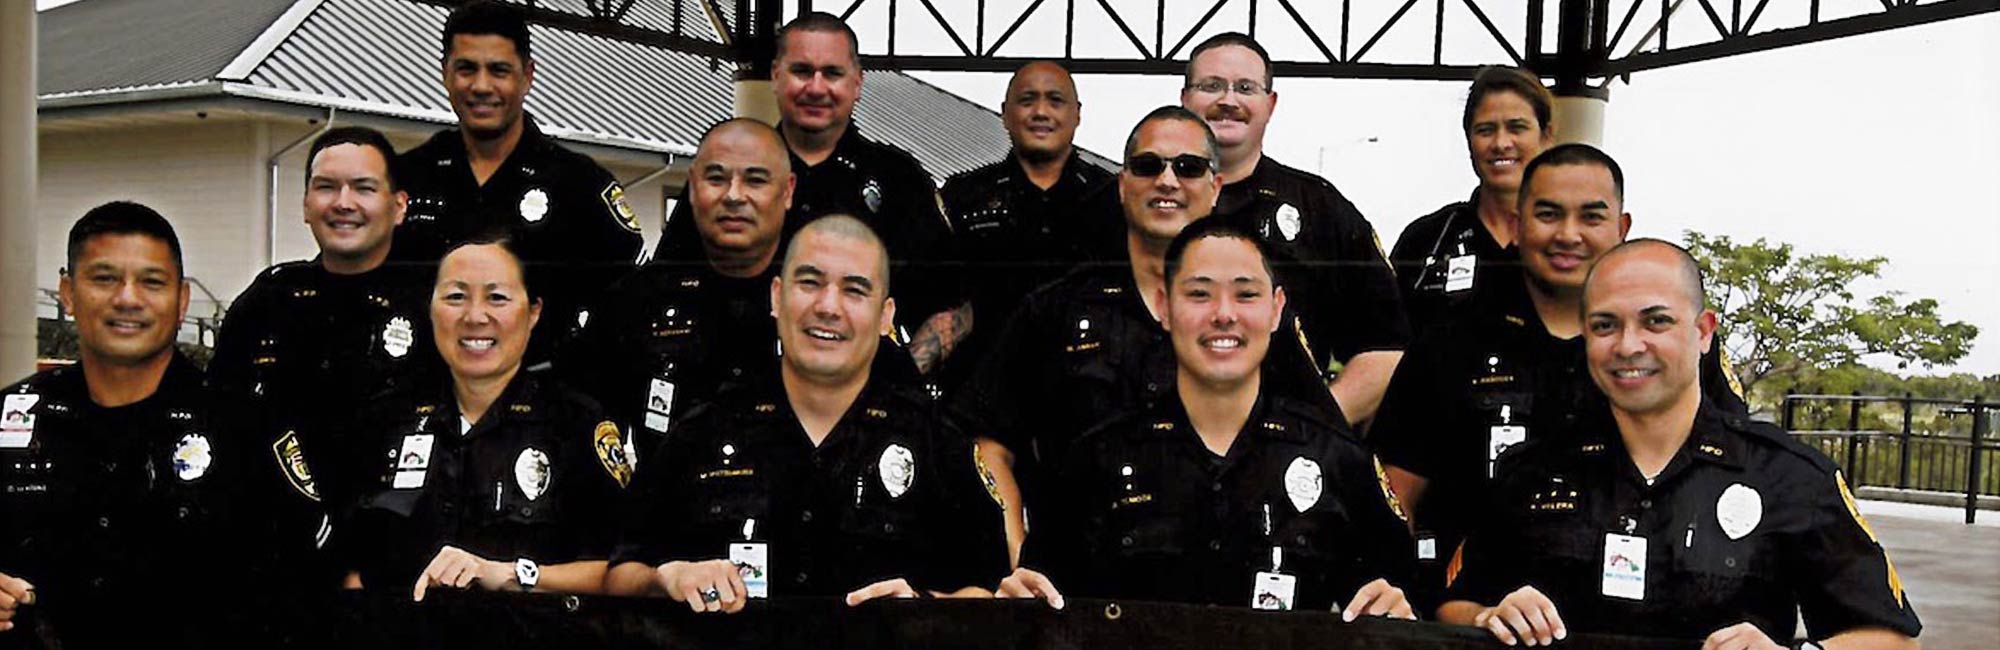 image of D.A.R.E. officers